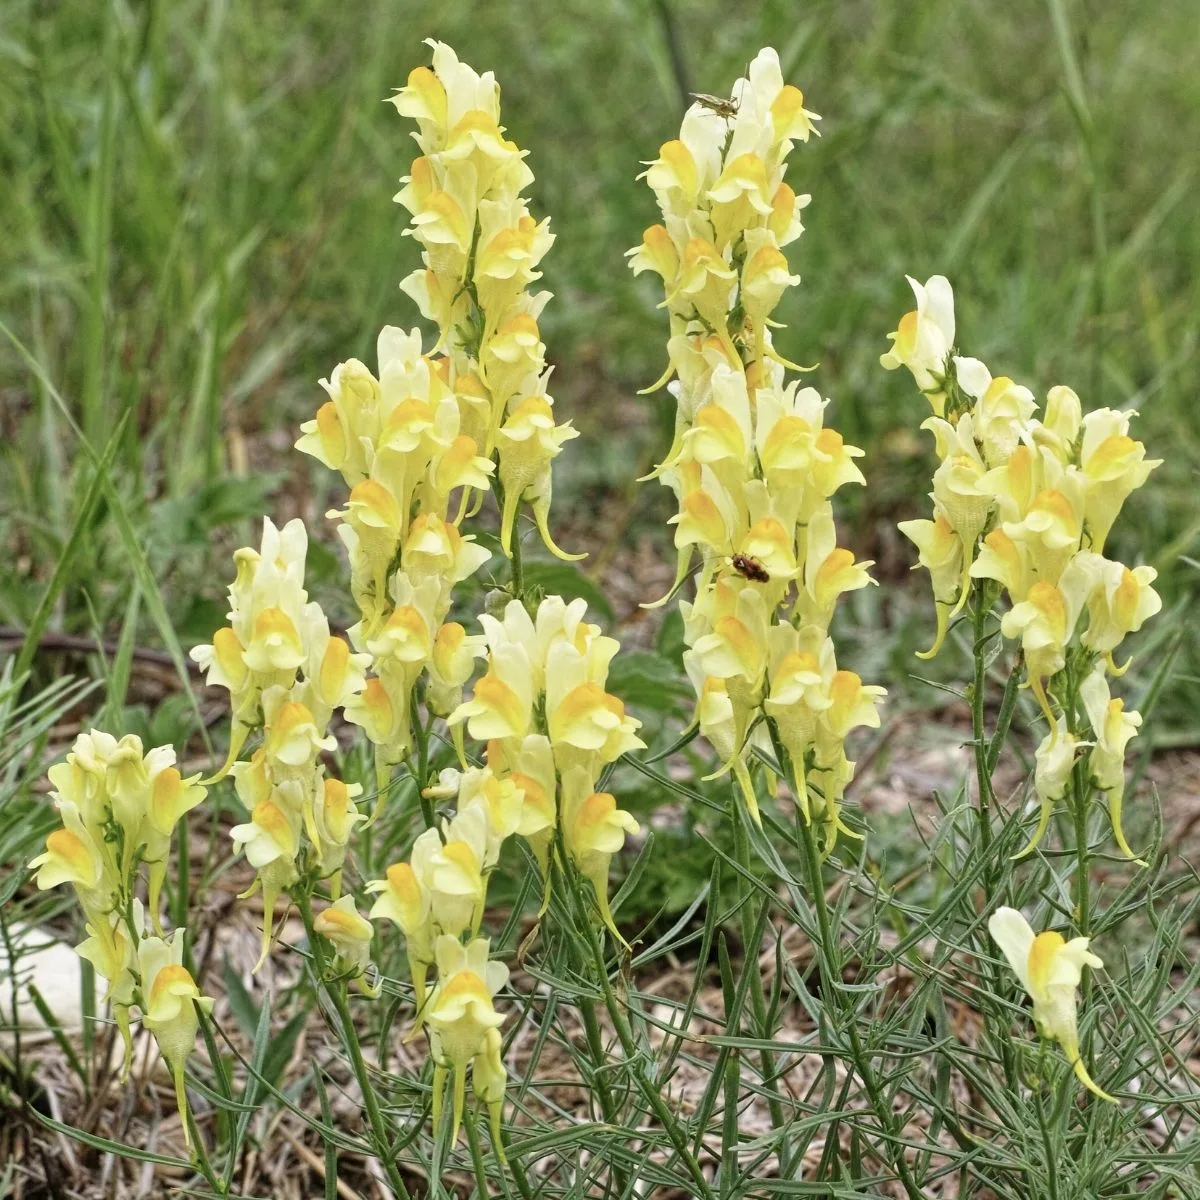 Yellow toadflax flowers